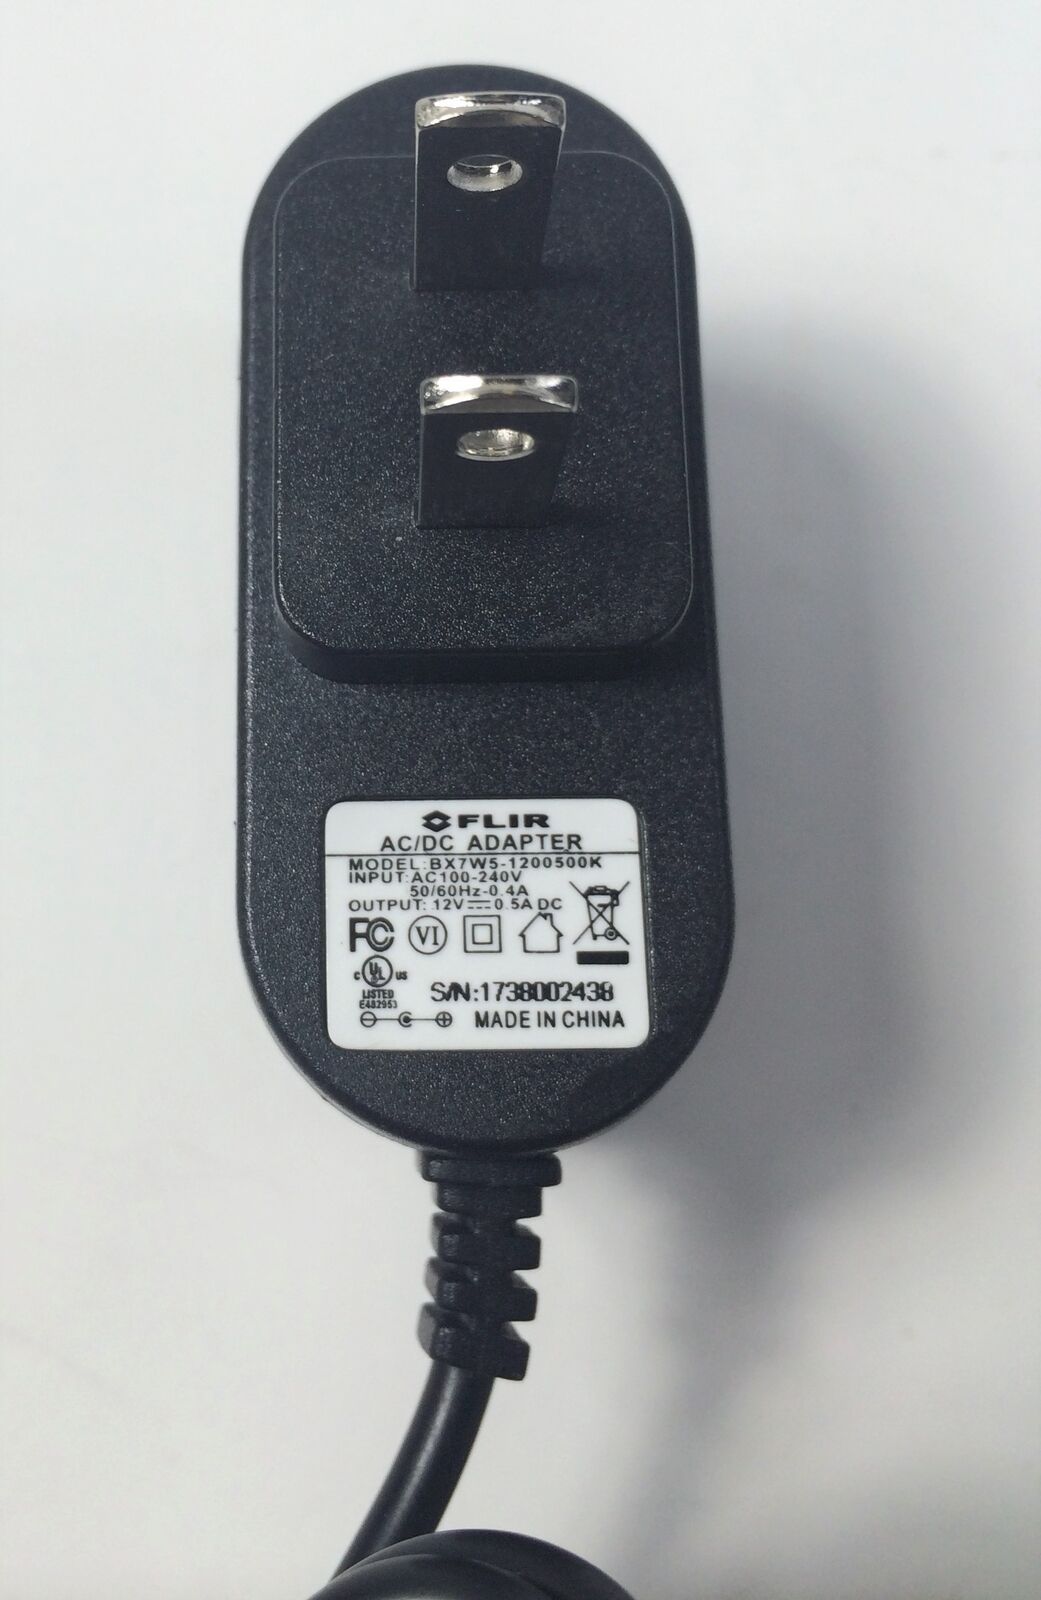 Brand New 12V DC 0.5A AC/DC Adapter For FLIR BX7W5-1200500K Power Supply Cord Specification: Bran